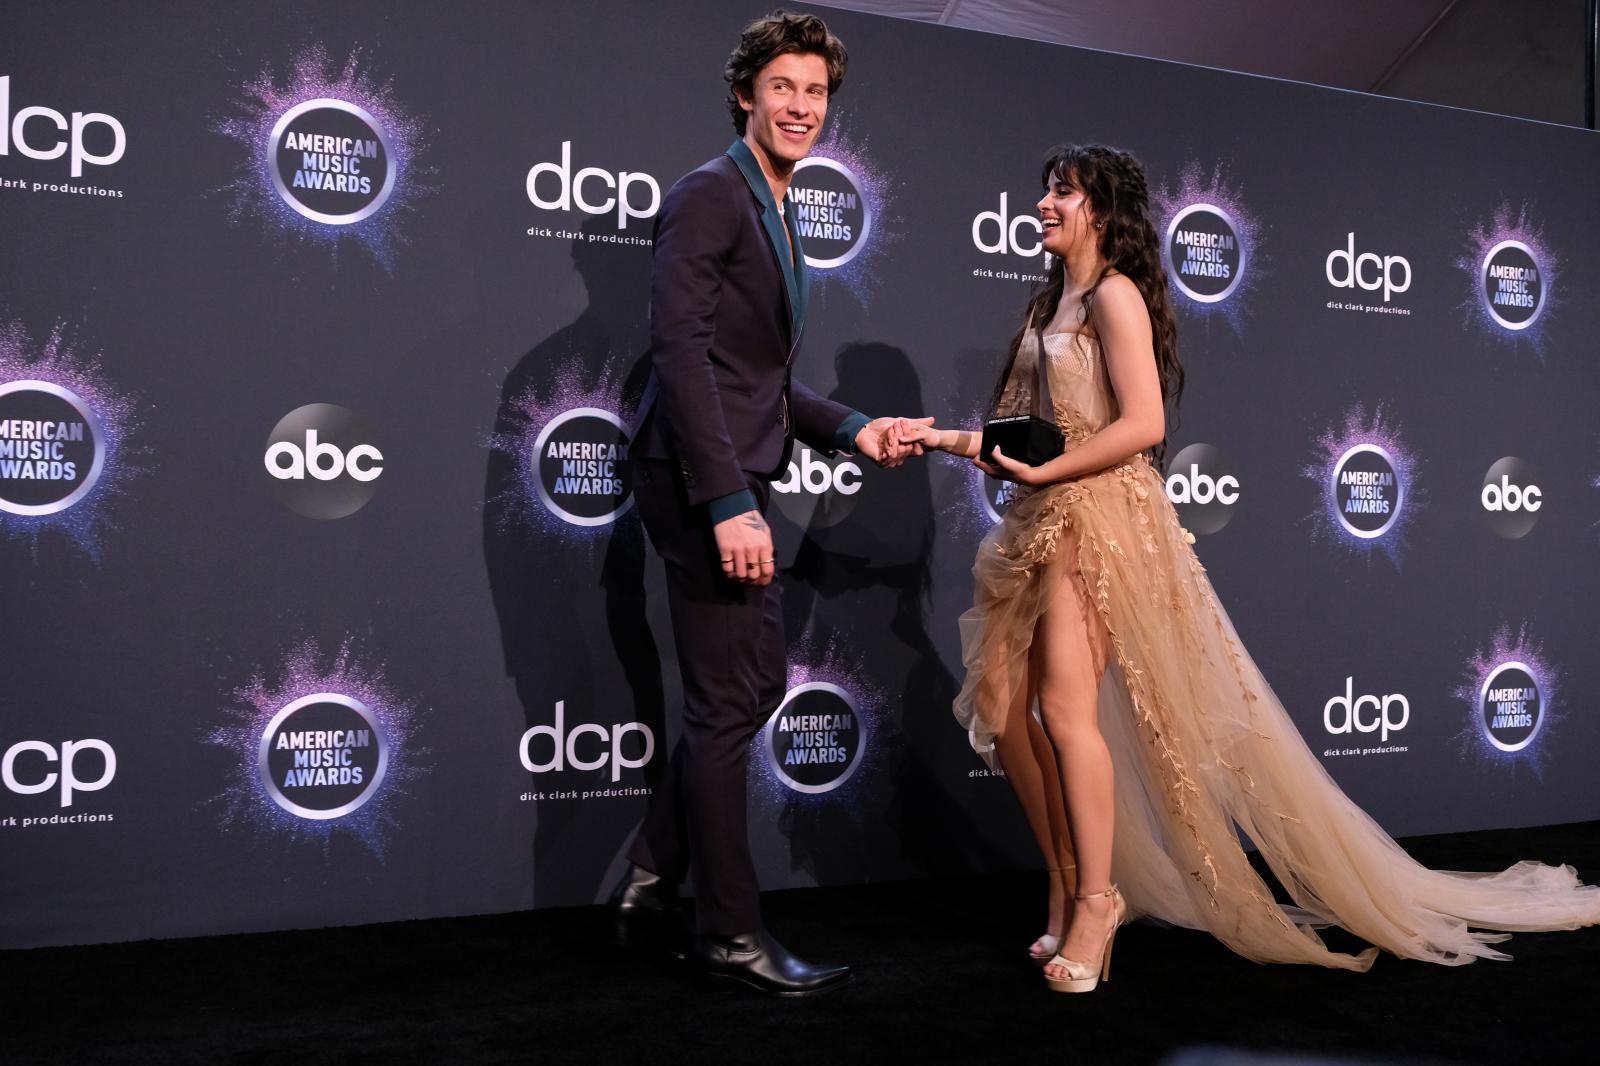 RED CARPET I CELEBRITY - LOS ANGELES, CALIFORNIA - NOVEMBER 24: Shawn Mendes and...